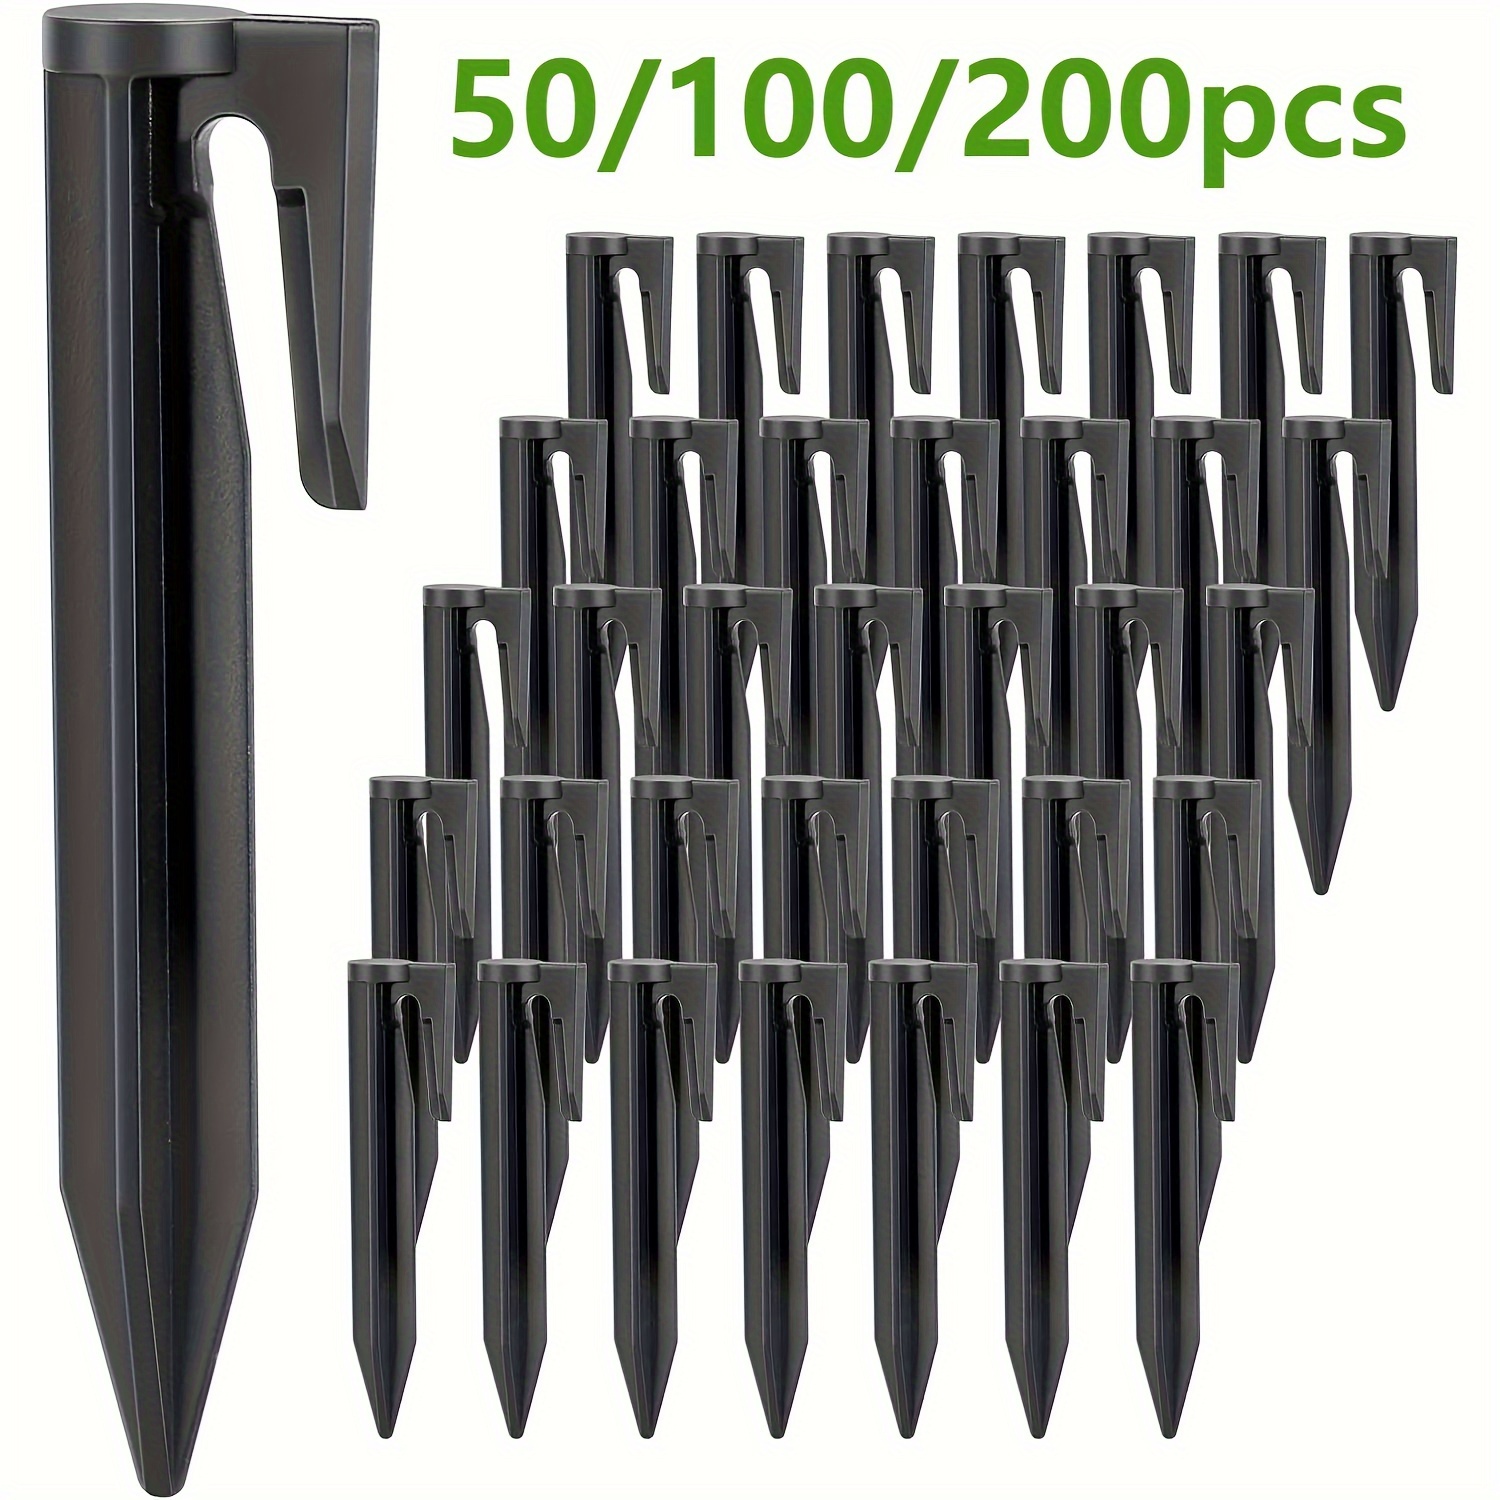 

50pcs/100pcs Plastic Tent Pegs, Garden Lawn Mower Border Cable Clips, Durable Ground Stakes, Serrated Thread Outdoor Camping Windproof Fixing Nails